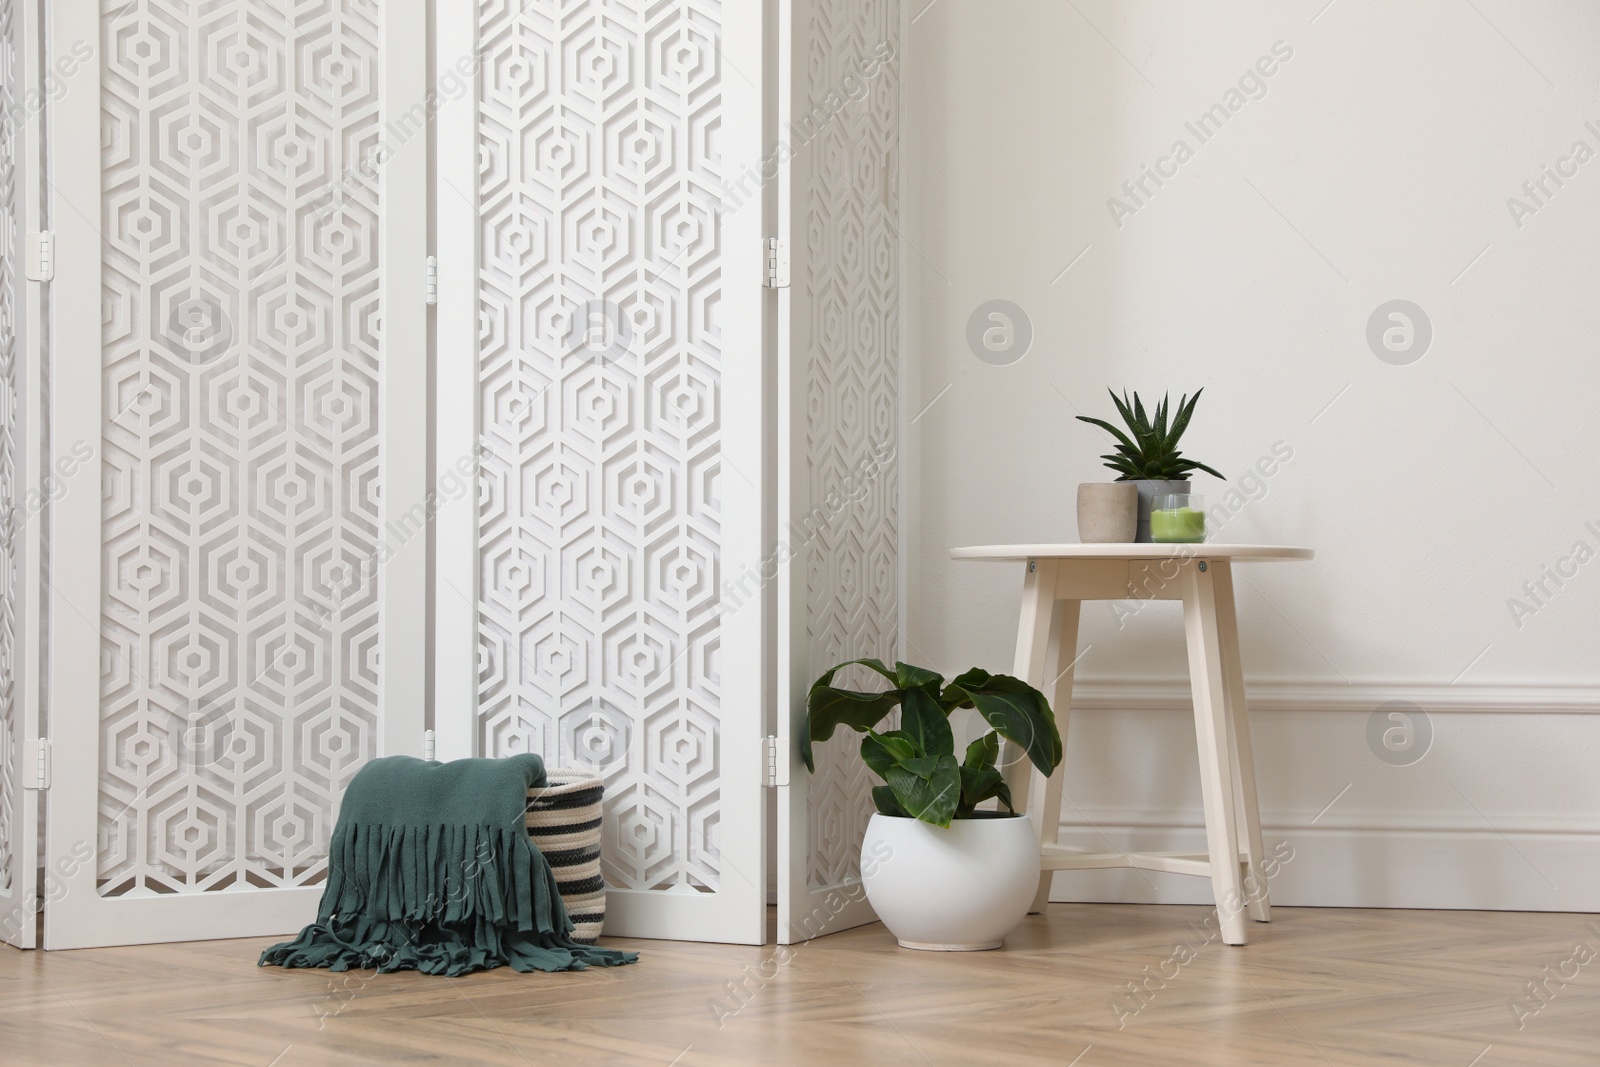 Photo of Folding screen and small table with houseplants near white wall in room. Interior design